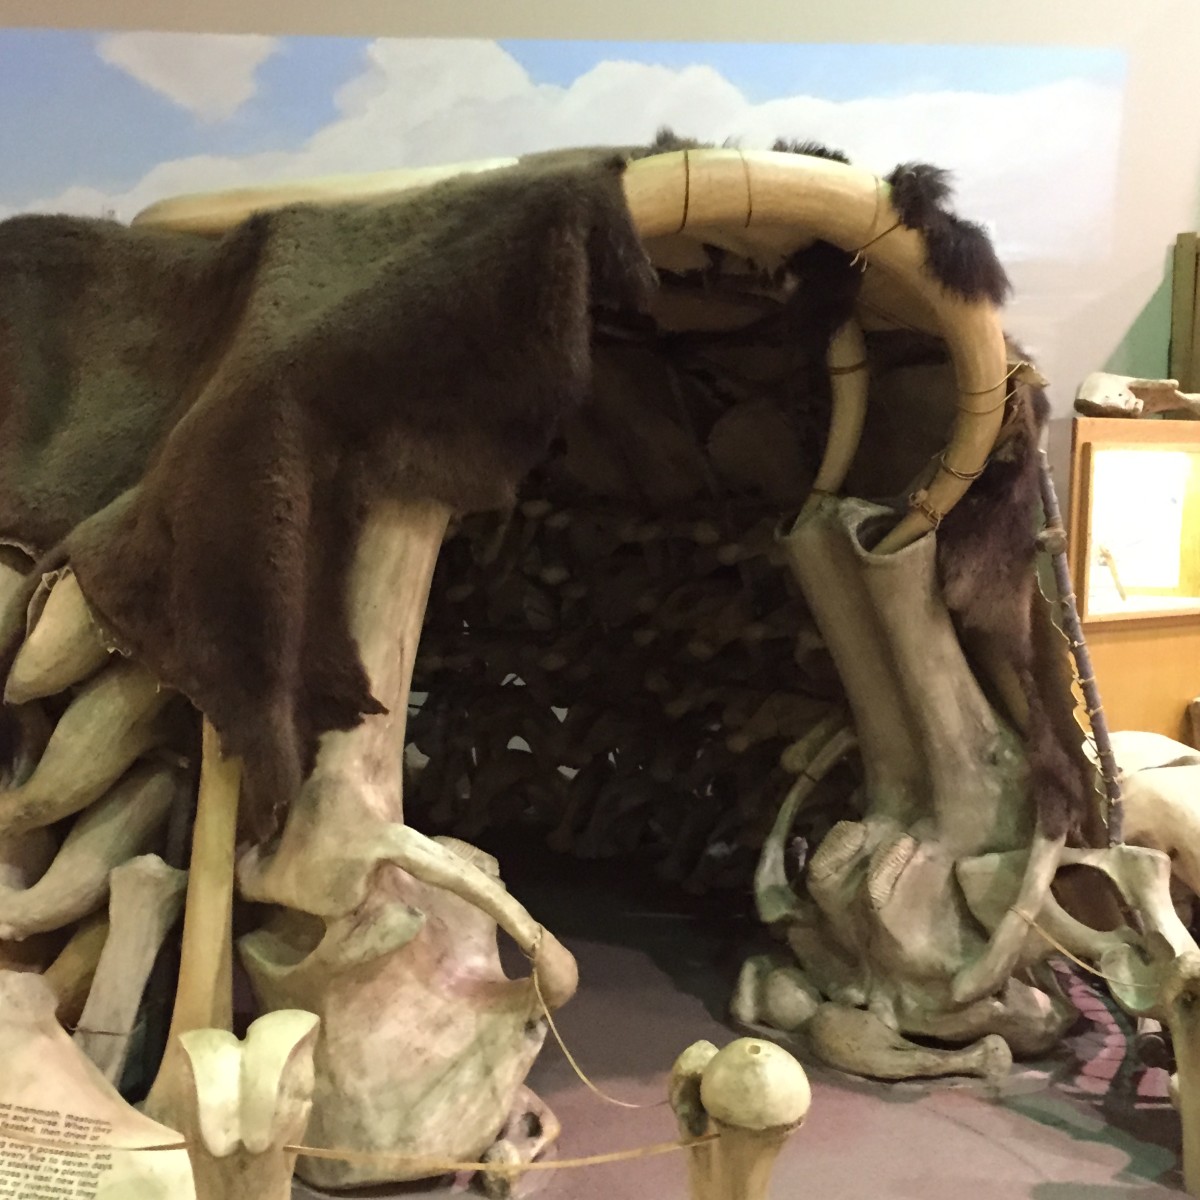 This bone shelter is an example of how early humans used mammoths for survival.